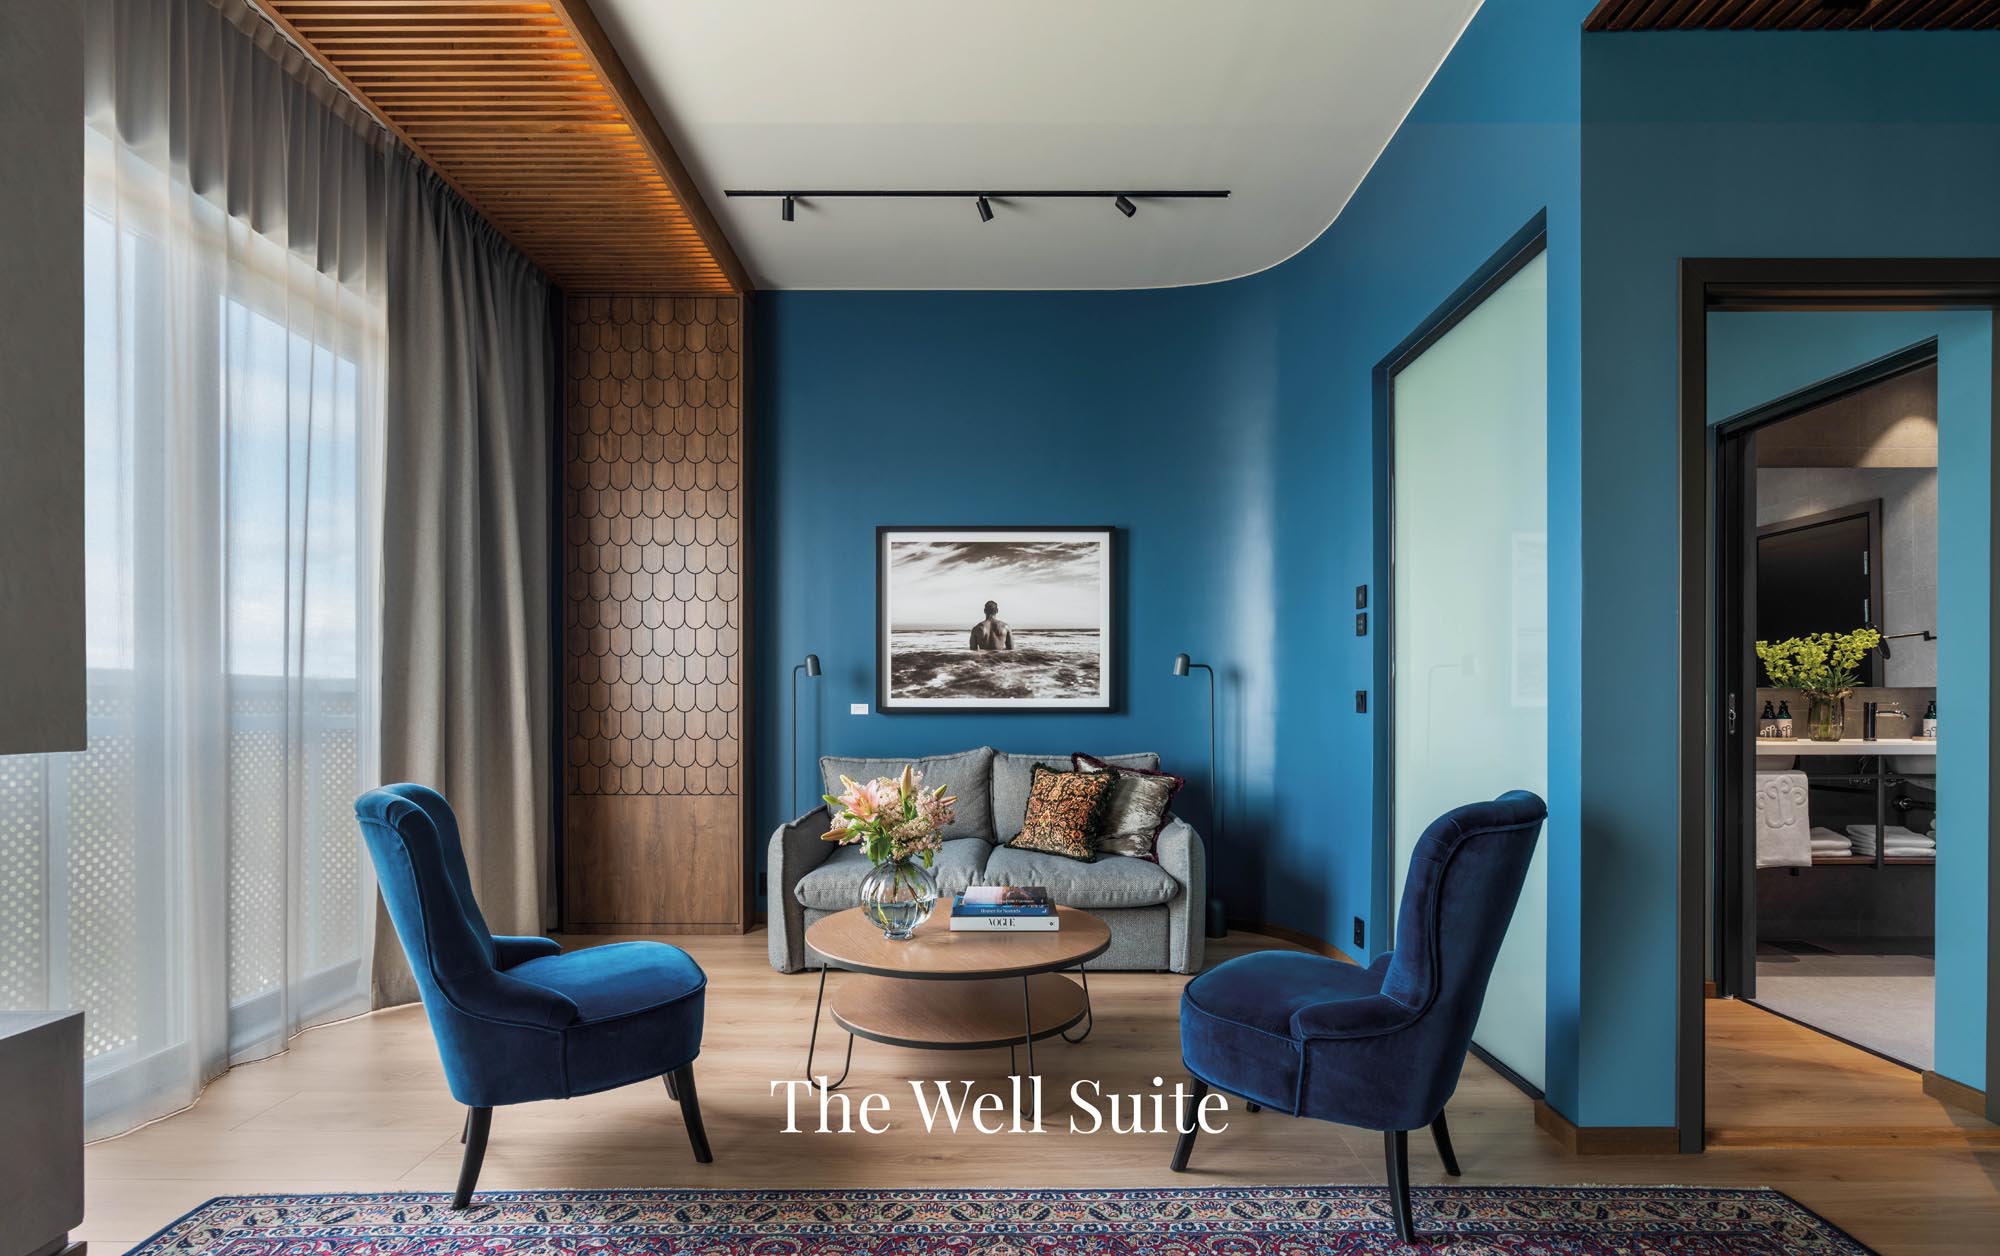 The Well Suite